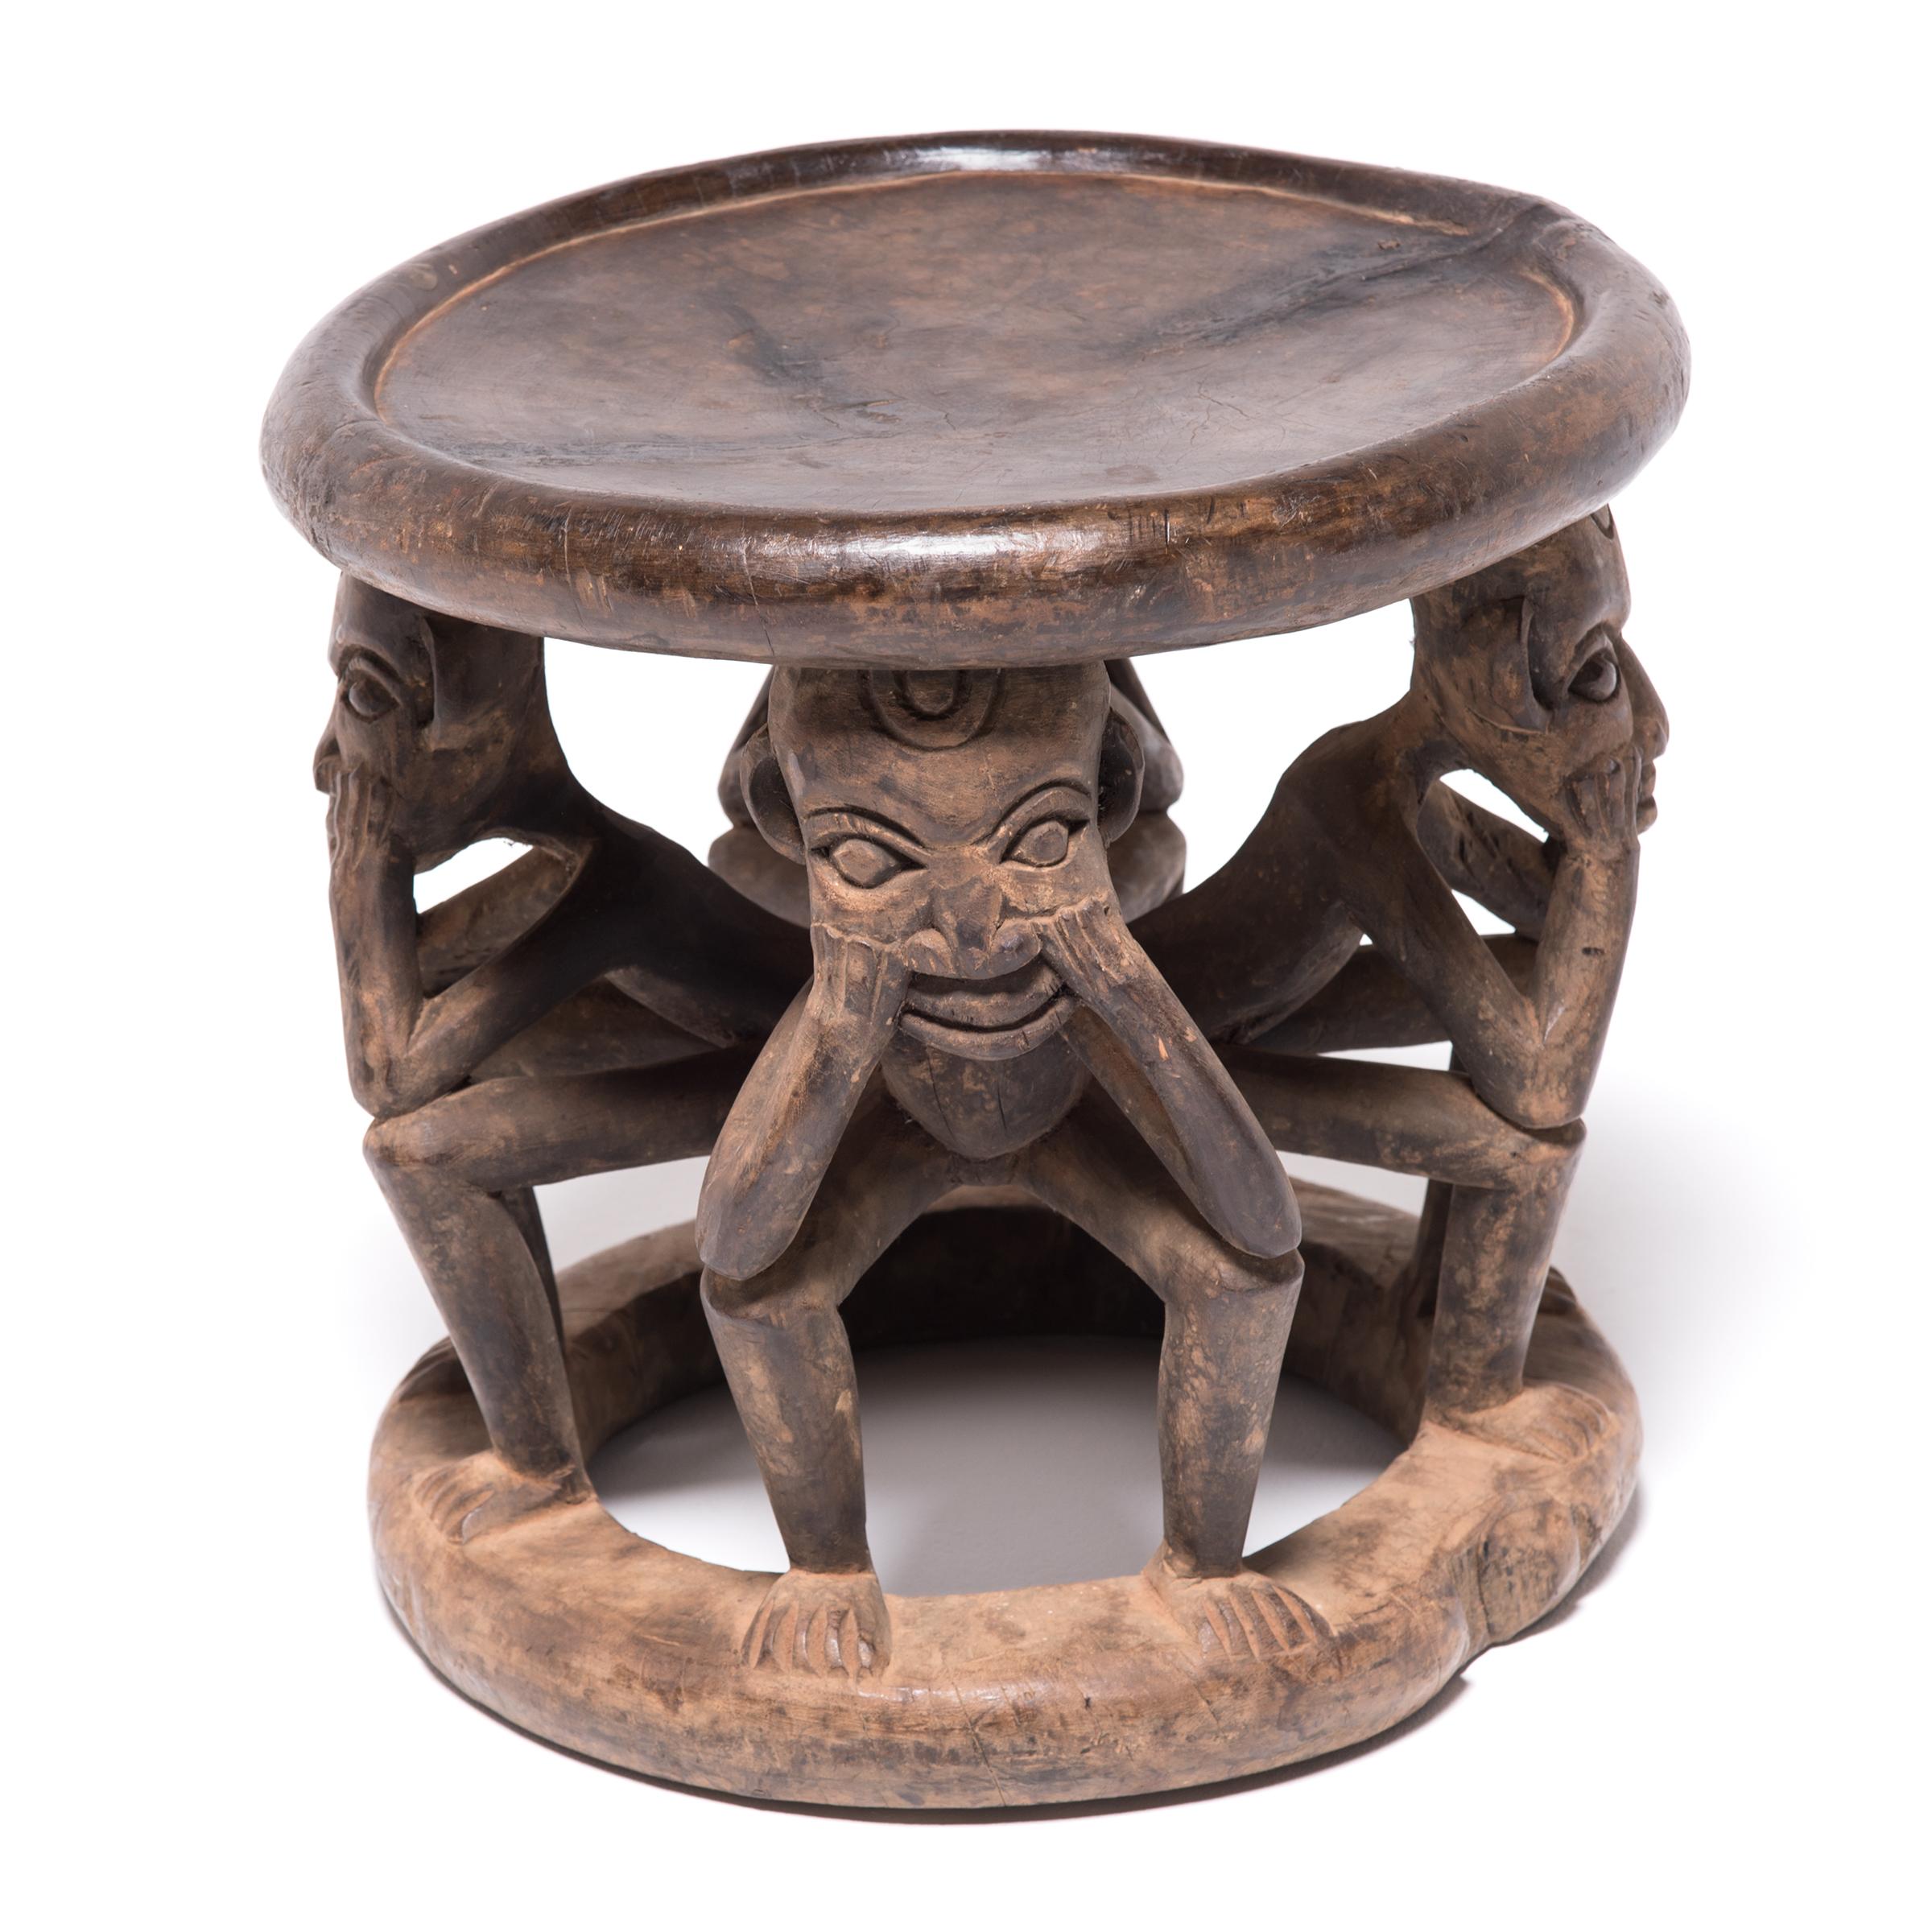 Marked by the telltale Bamileke rounded disc seat and base, this stool features a group of pondering human figures as its vertical supports instead of the more common abstract carvings. Created from a single tree trunk, the stool serves dual